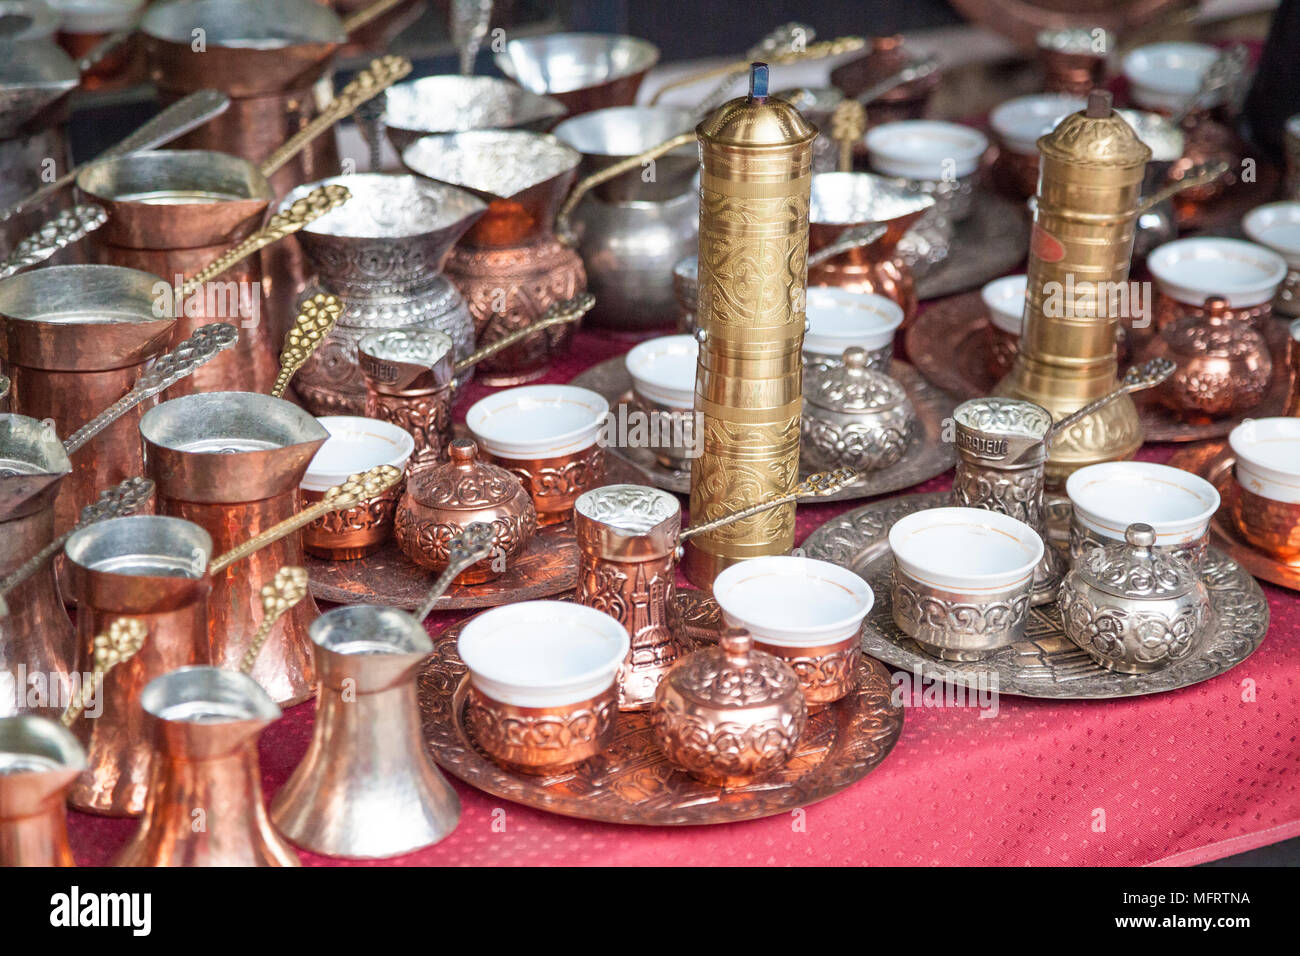 Coffee pots and cups on a souvenir stall in Sarajevo, Bosnia and Herzegovina Stock Photo